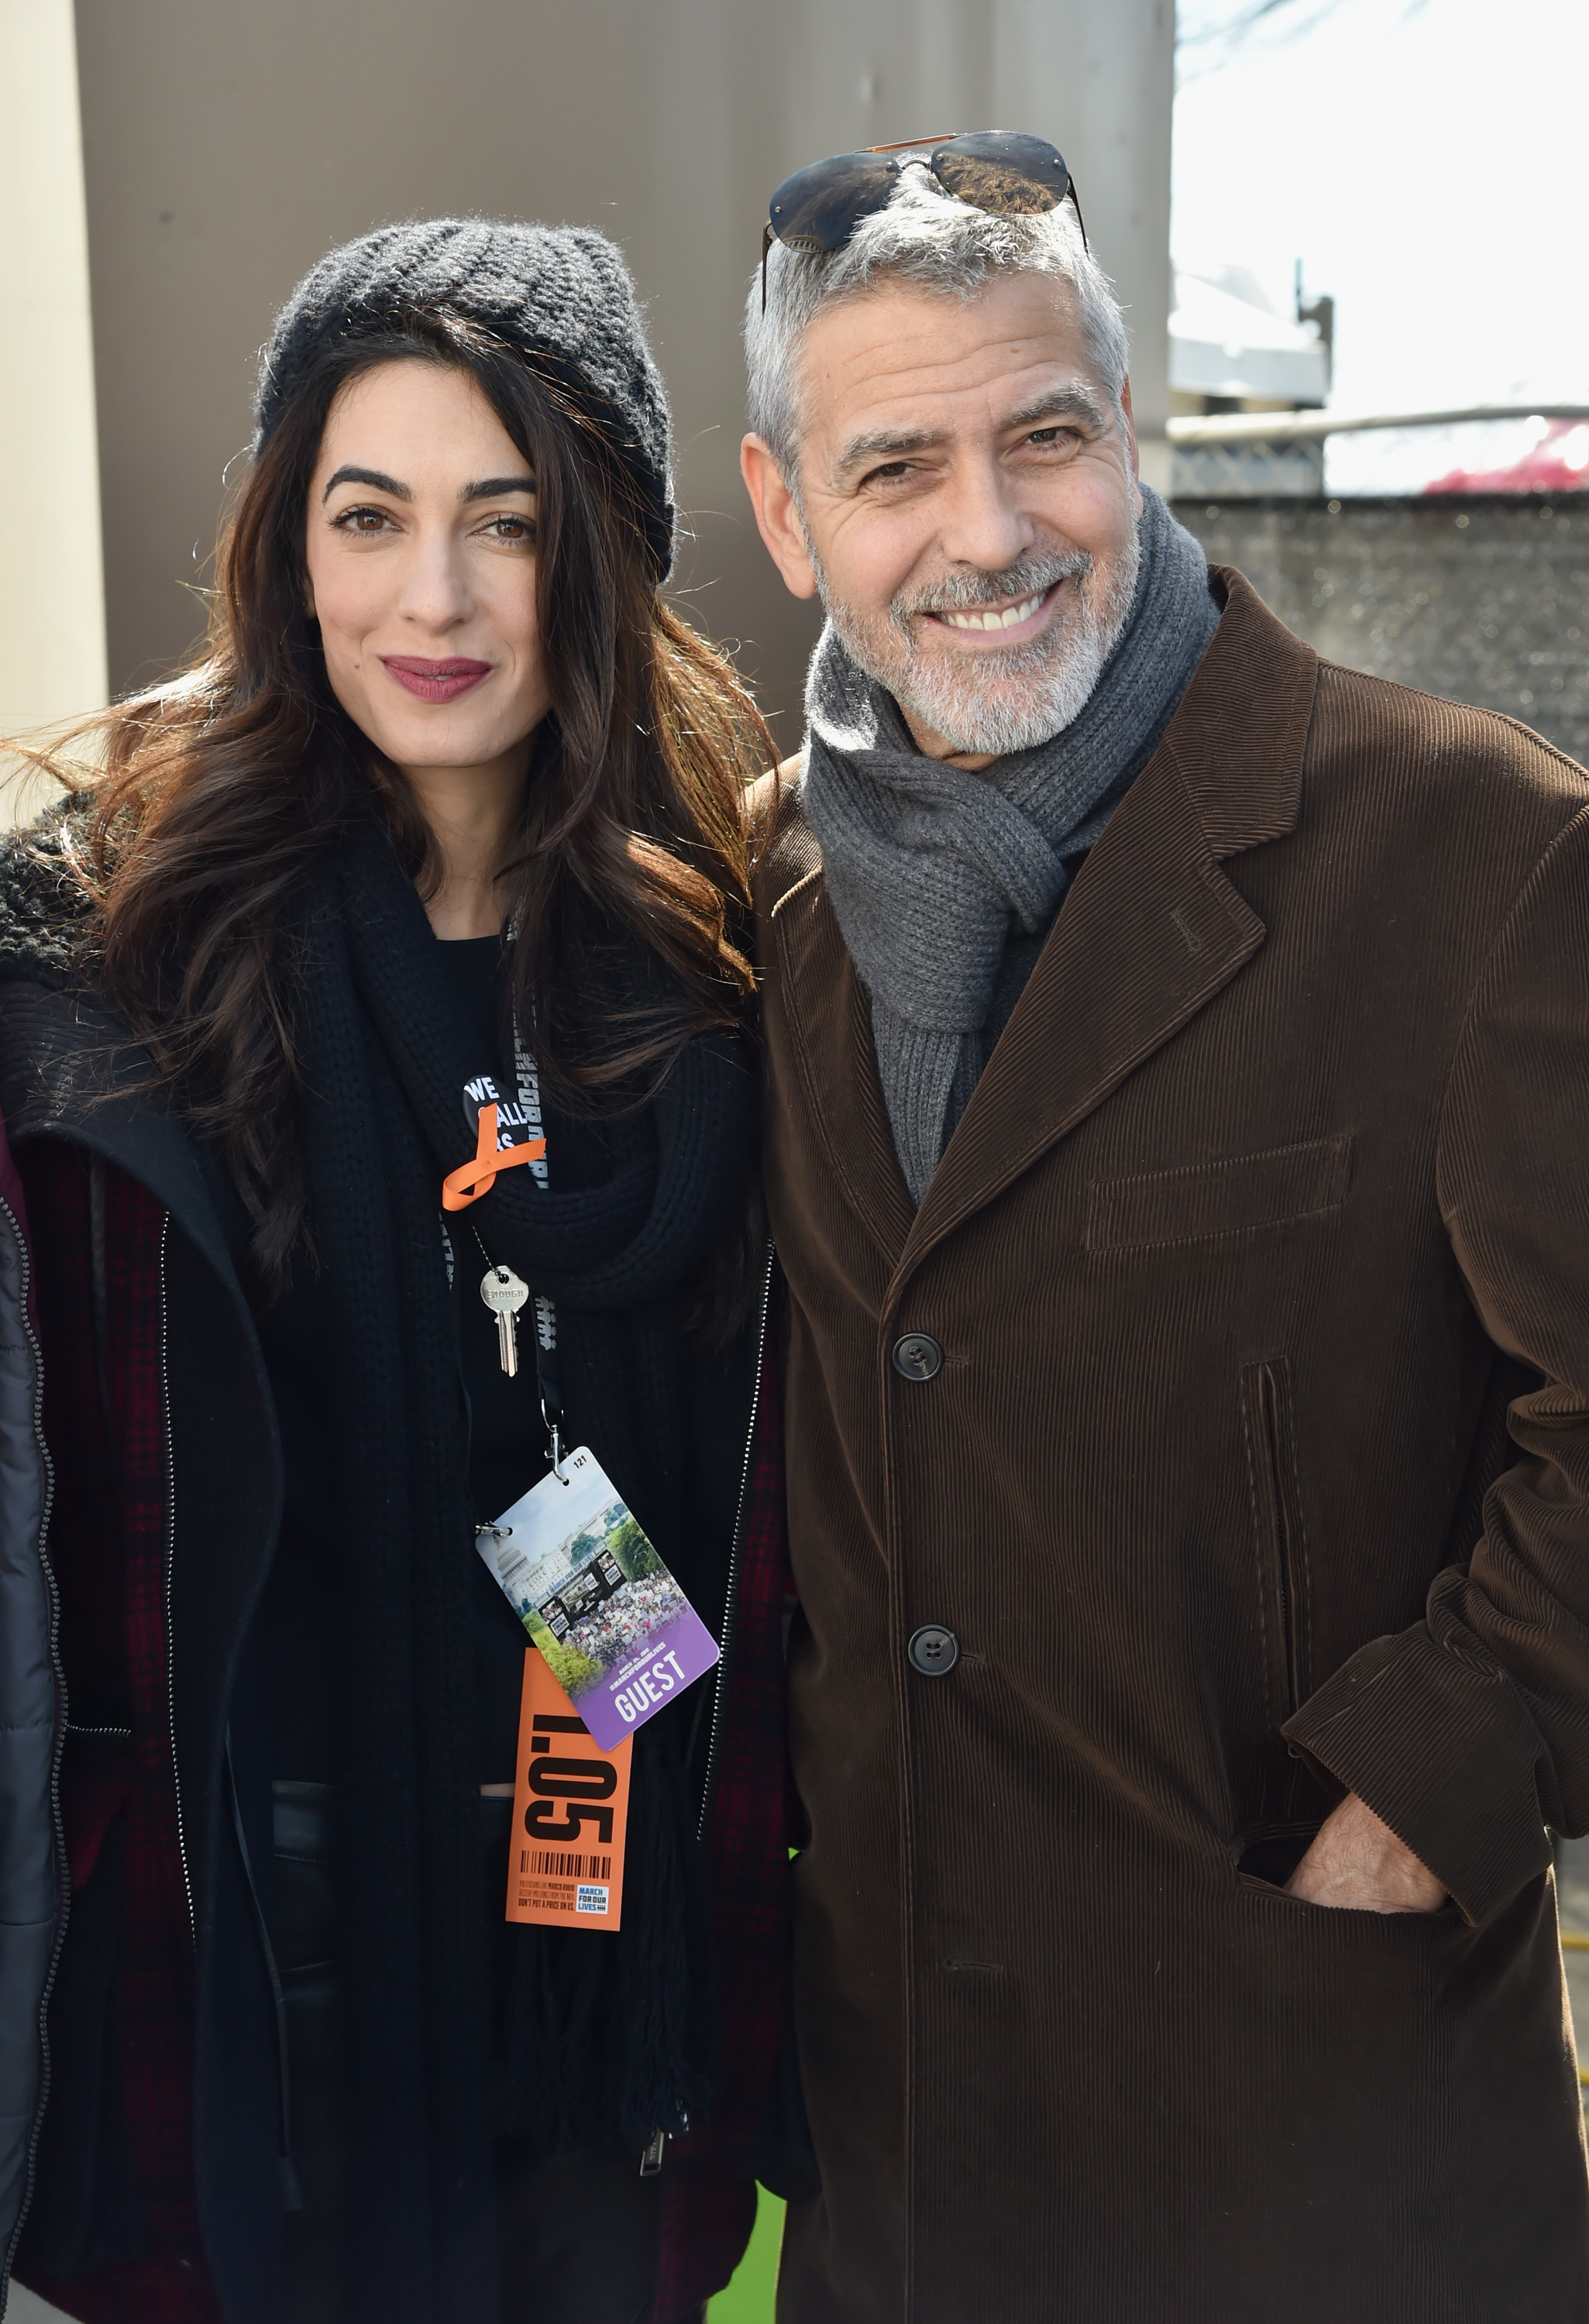 Amal Clooney and George Clooney attending March for Our Lives on March 24, 2018, in Washington, D.C. | Source: Getty Images